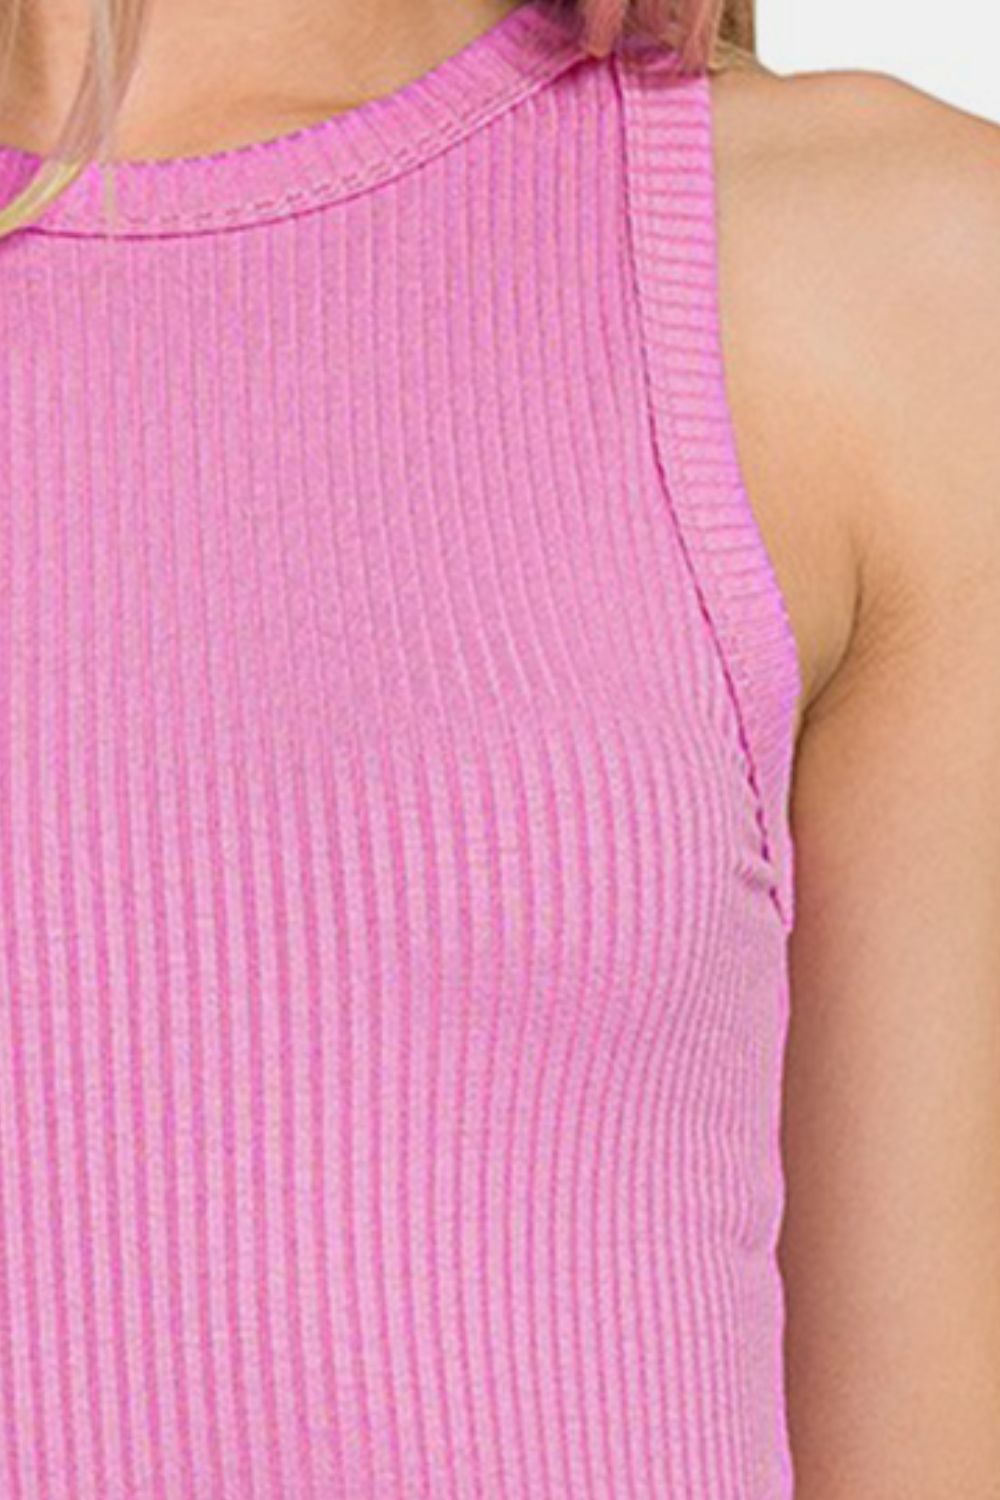 Ribbed Crew Neck Tank in Berry